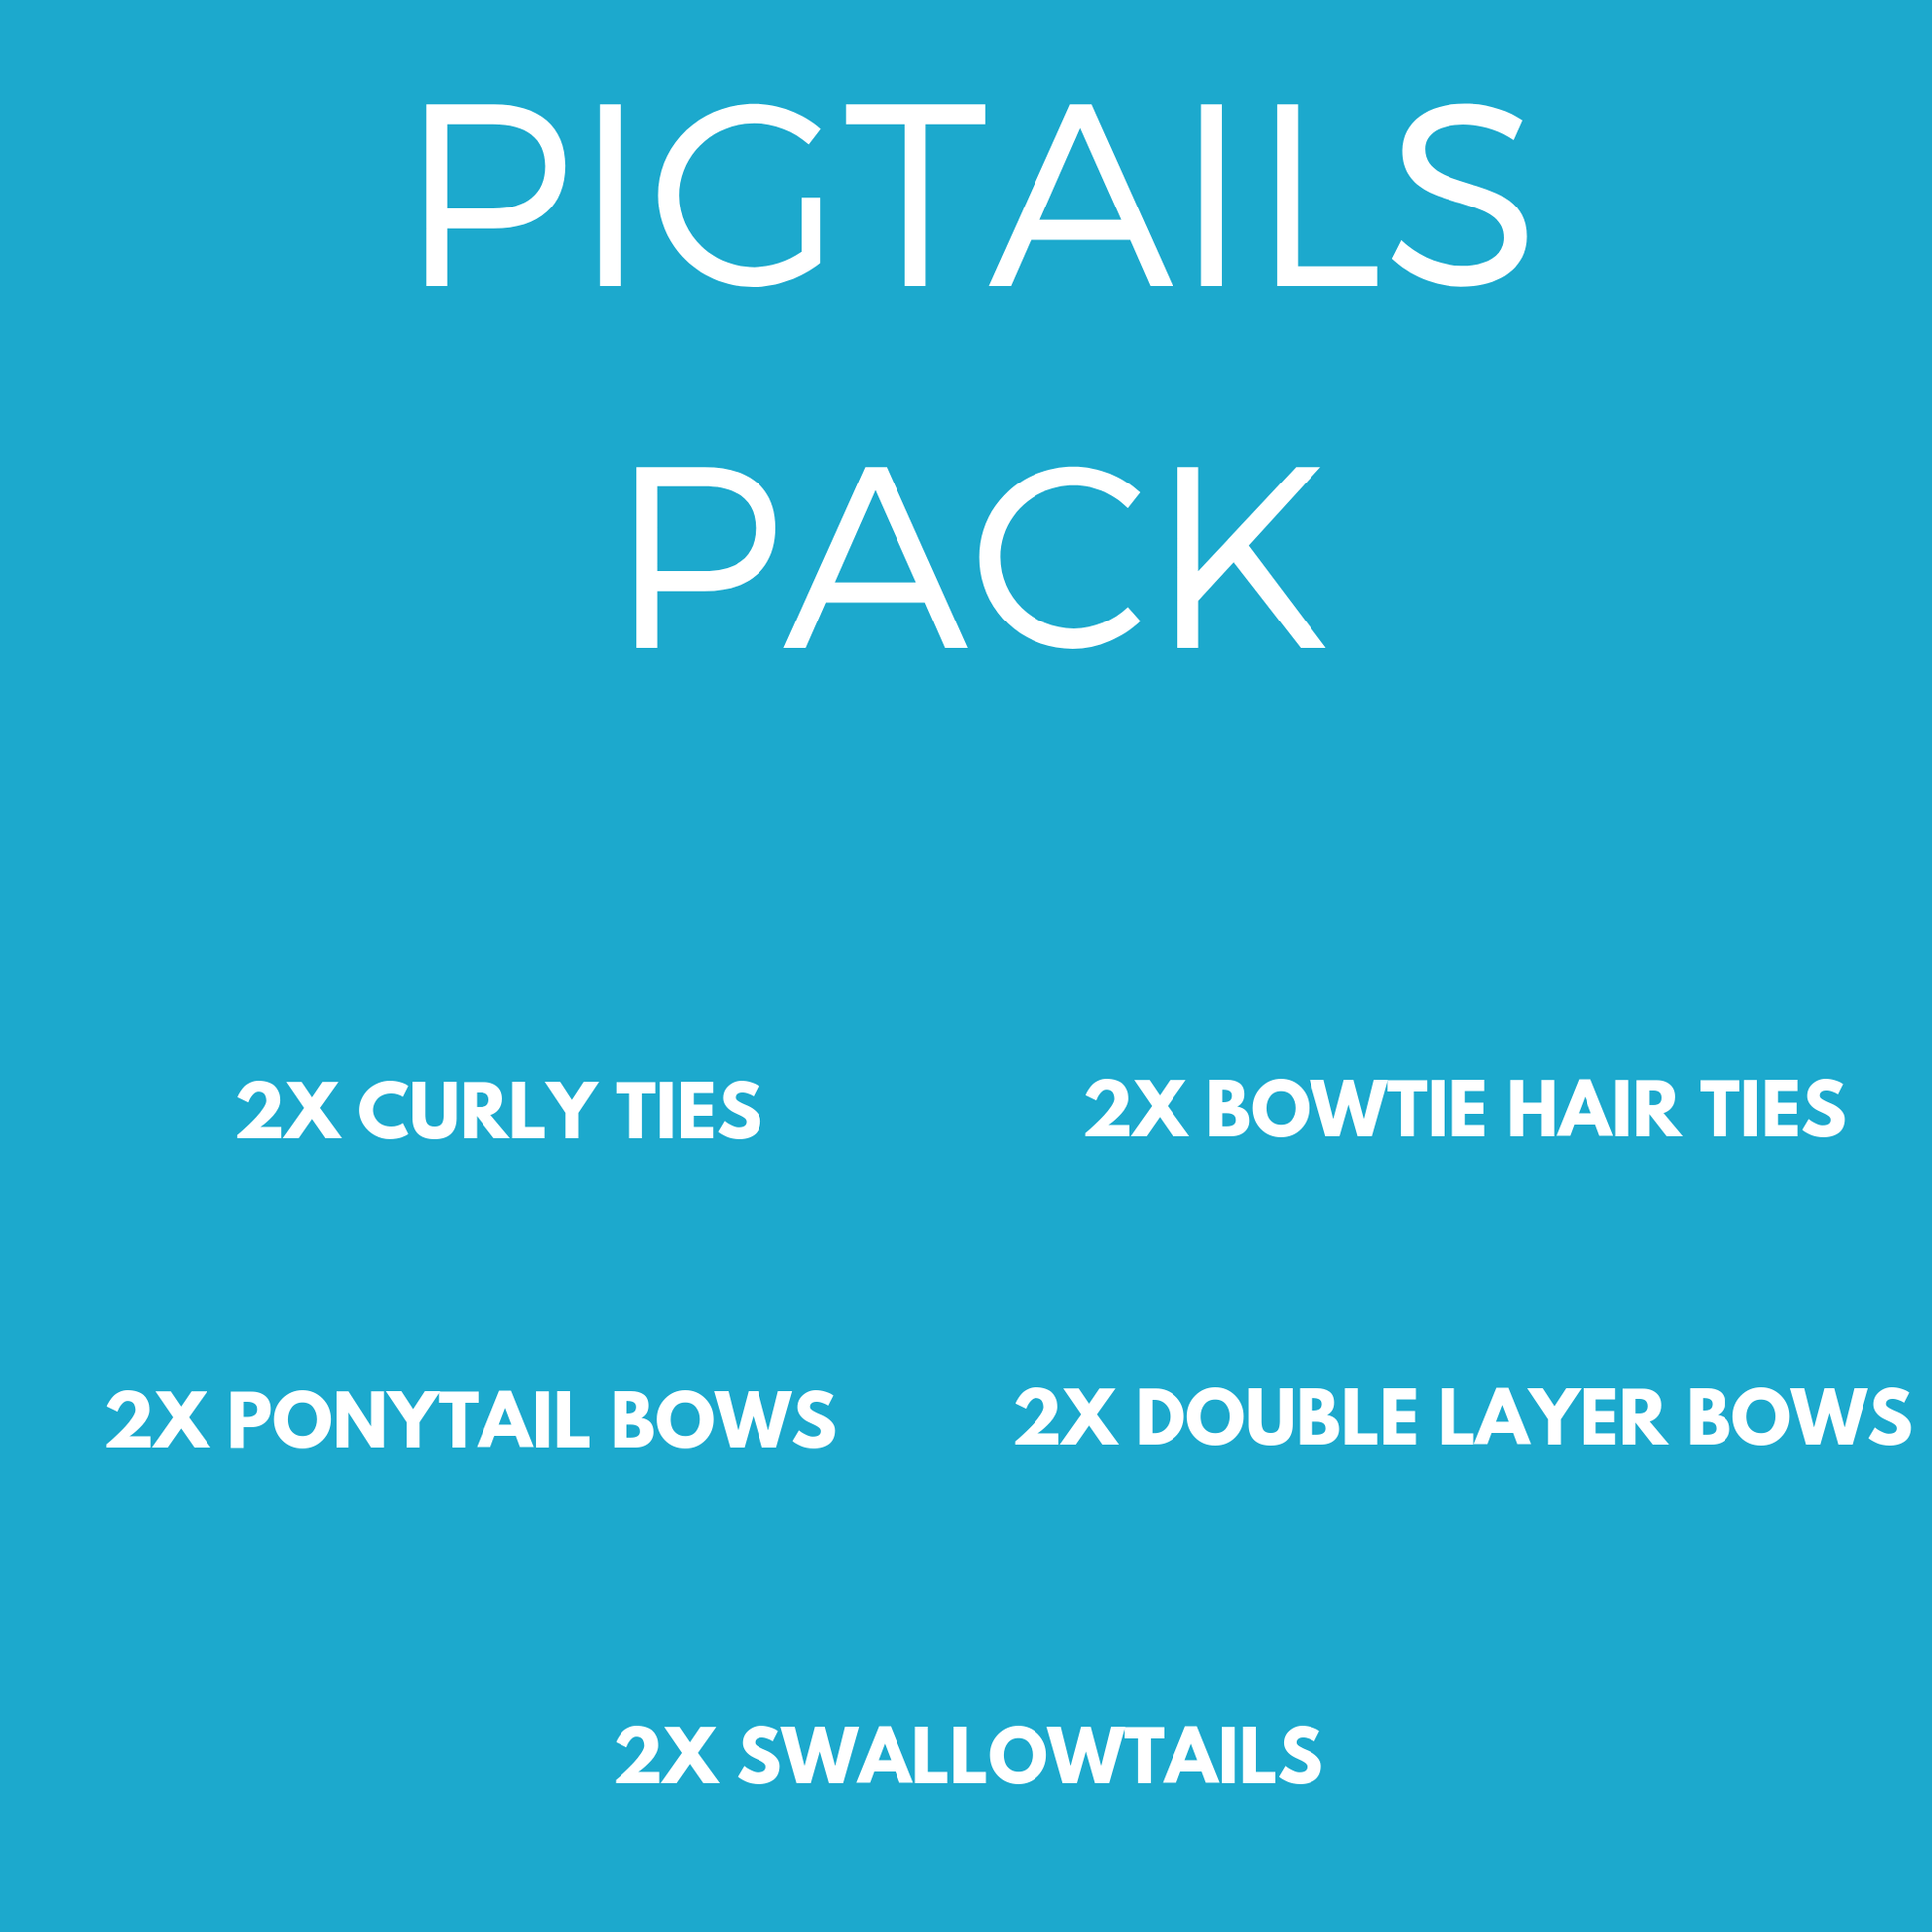 Pigtails Pack (10pc) - School kits - School Uniform Hair Accessories - Ponytails and Fairytales